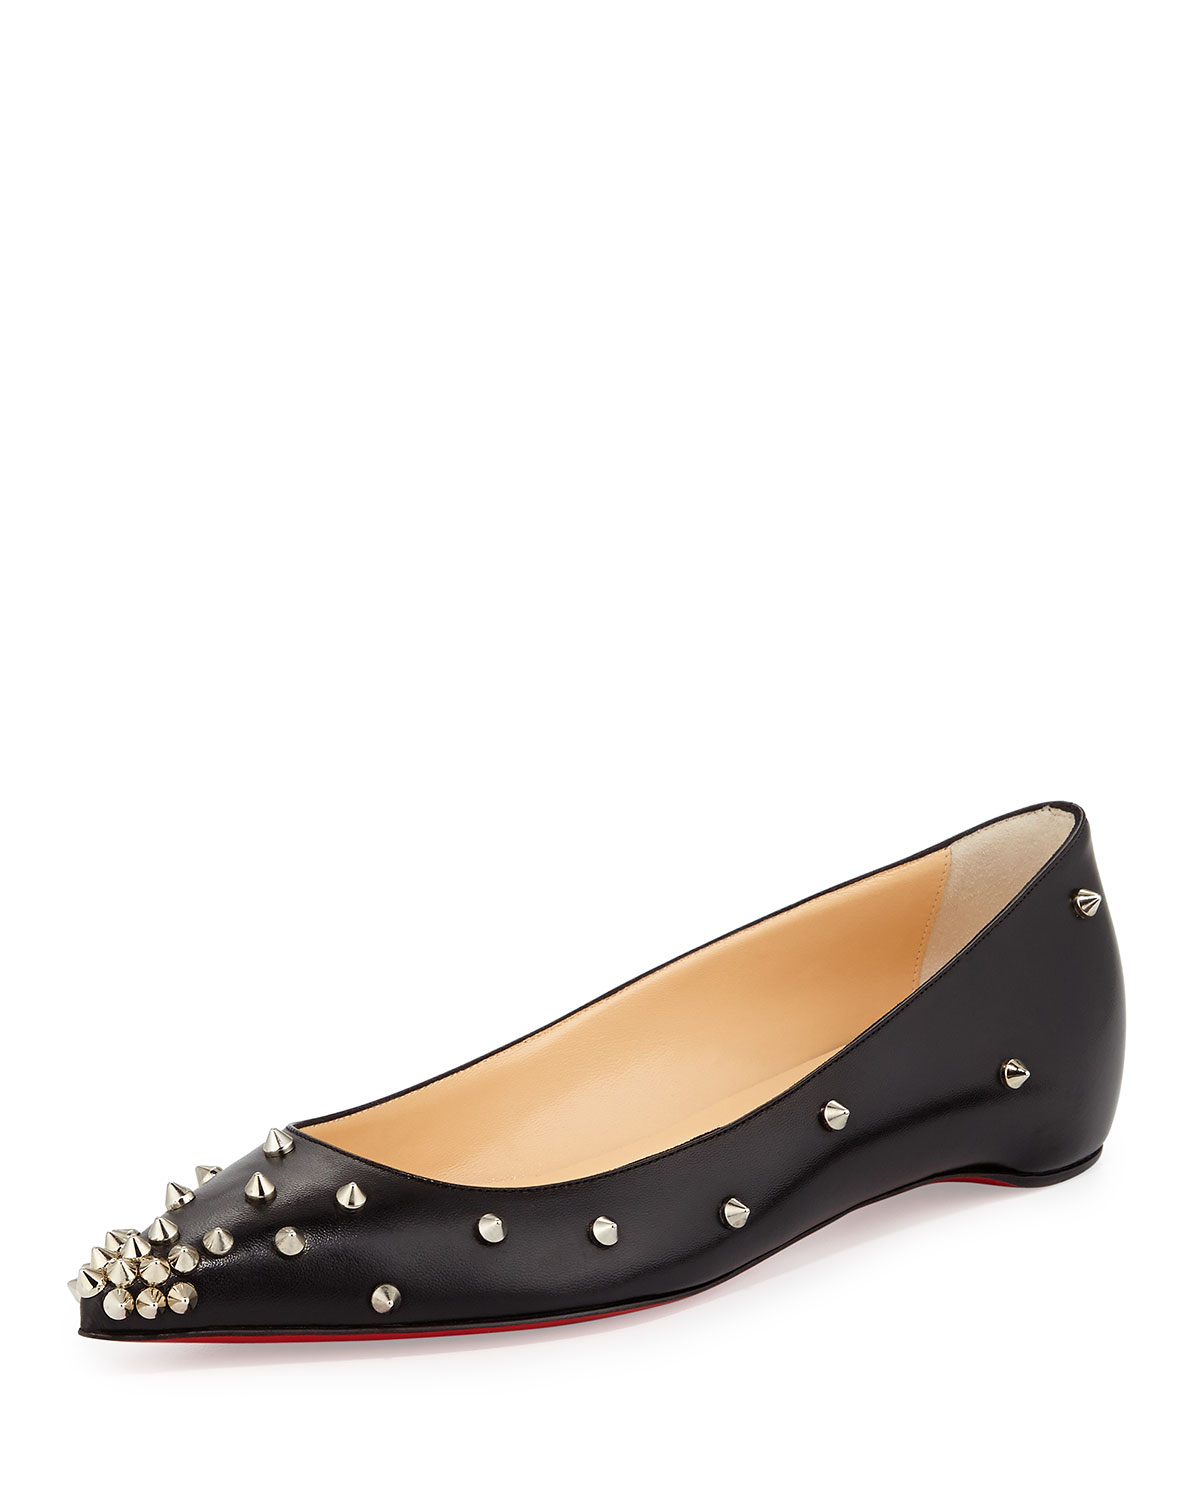 christian louboutin suede flats Black pointed toes - Bbridges